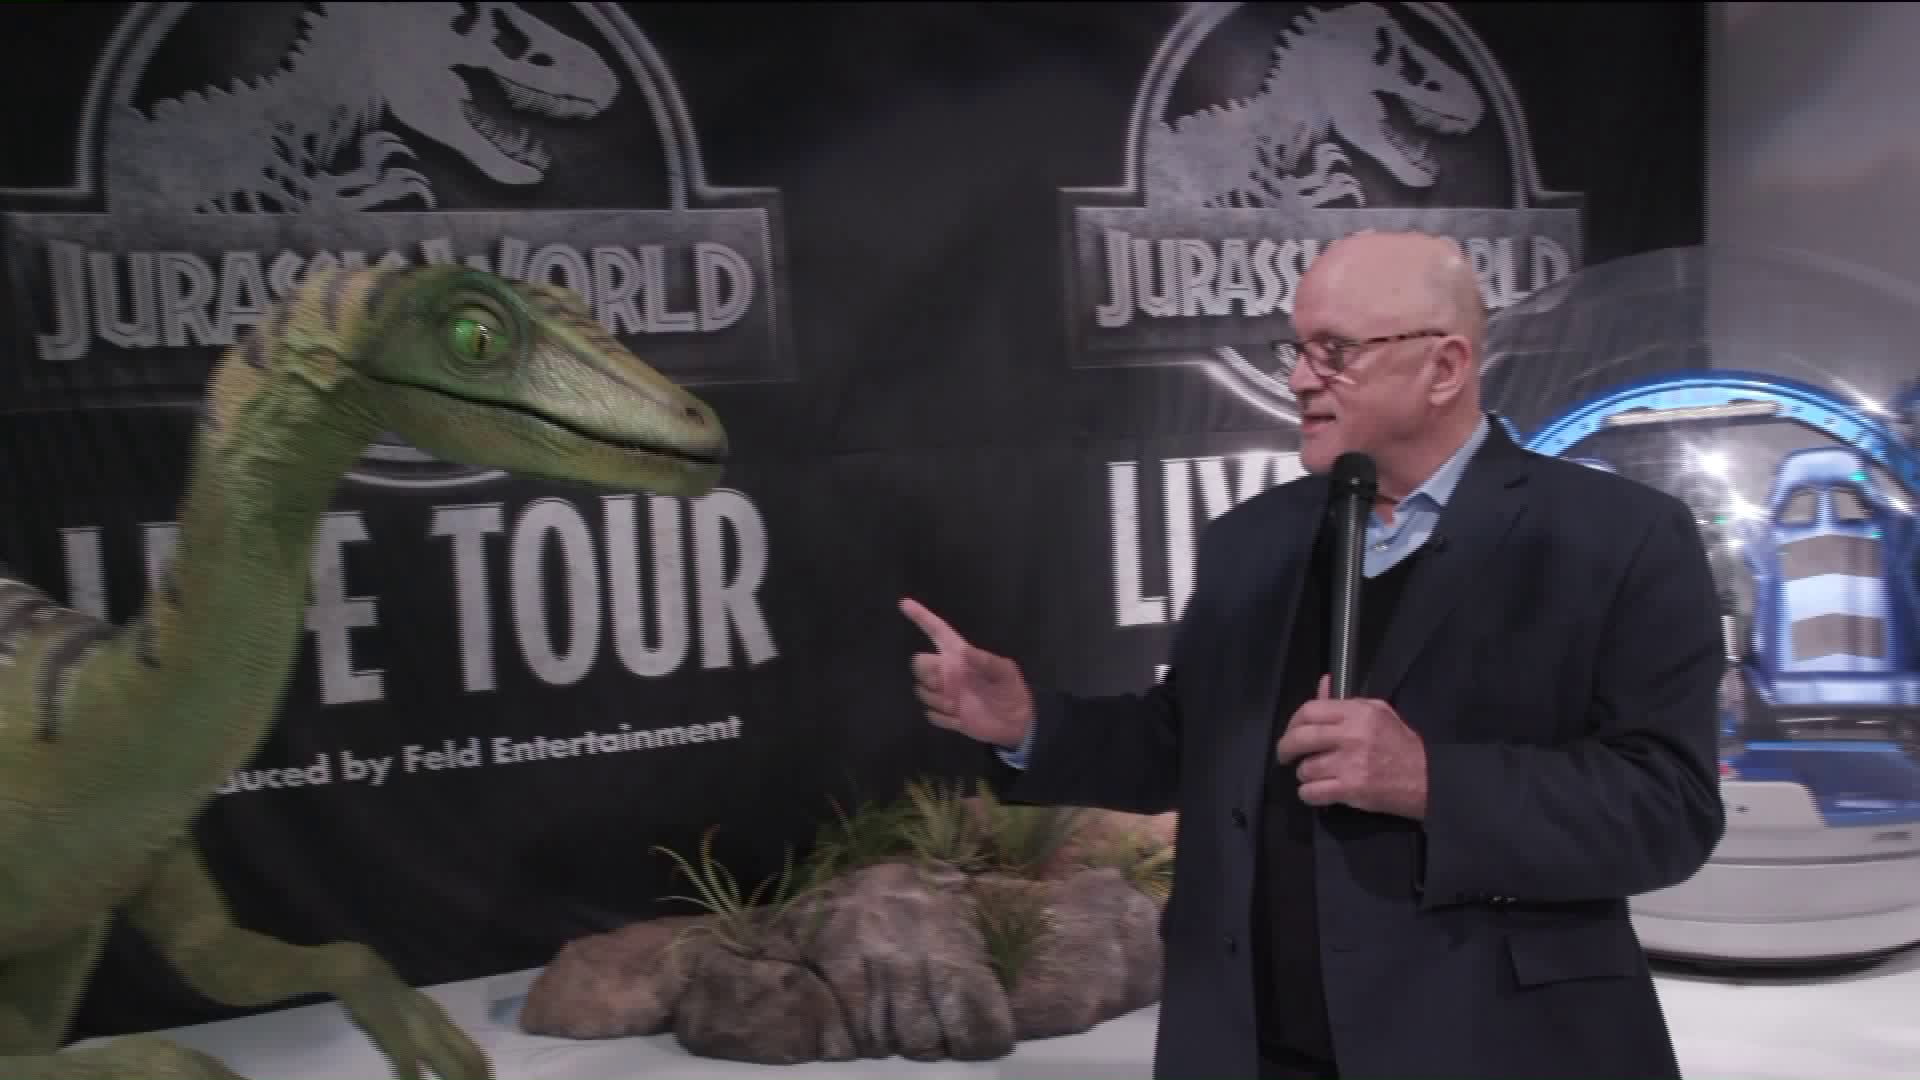 Dean got a sneak peek of the Jurassic World Live Tour coming to the Allstate Arena